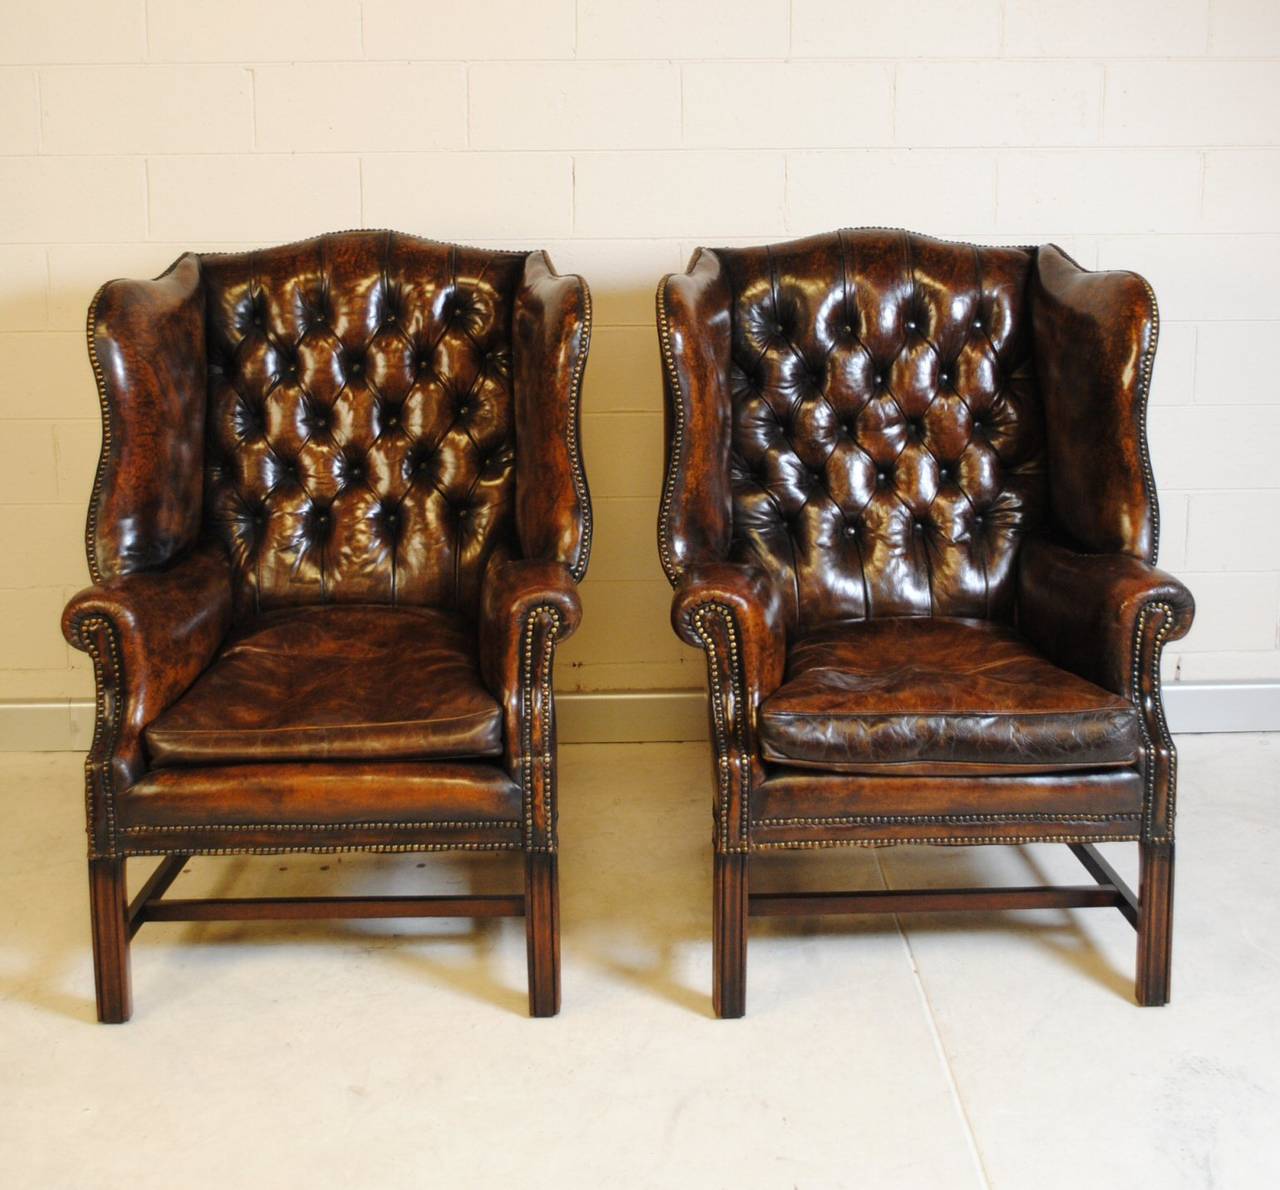 Pair of English wingback leather chairs with button tufted backs, brass studs and sturdy 'H' frame stretcher bases. A classic pair of chairs with a deep, rich patination perfect for the study. Dating from the early 1900s.